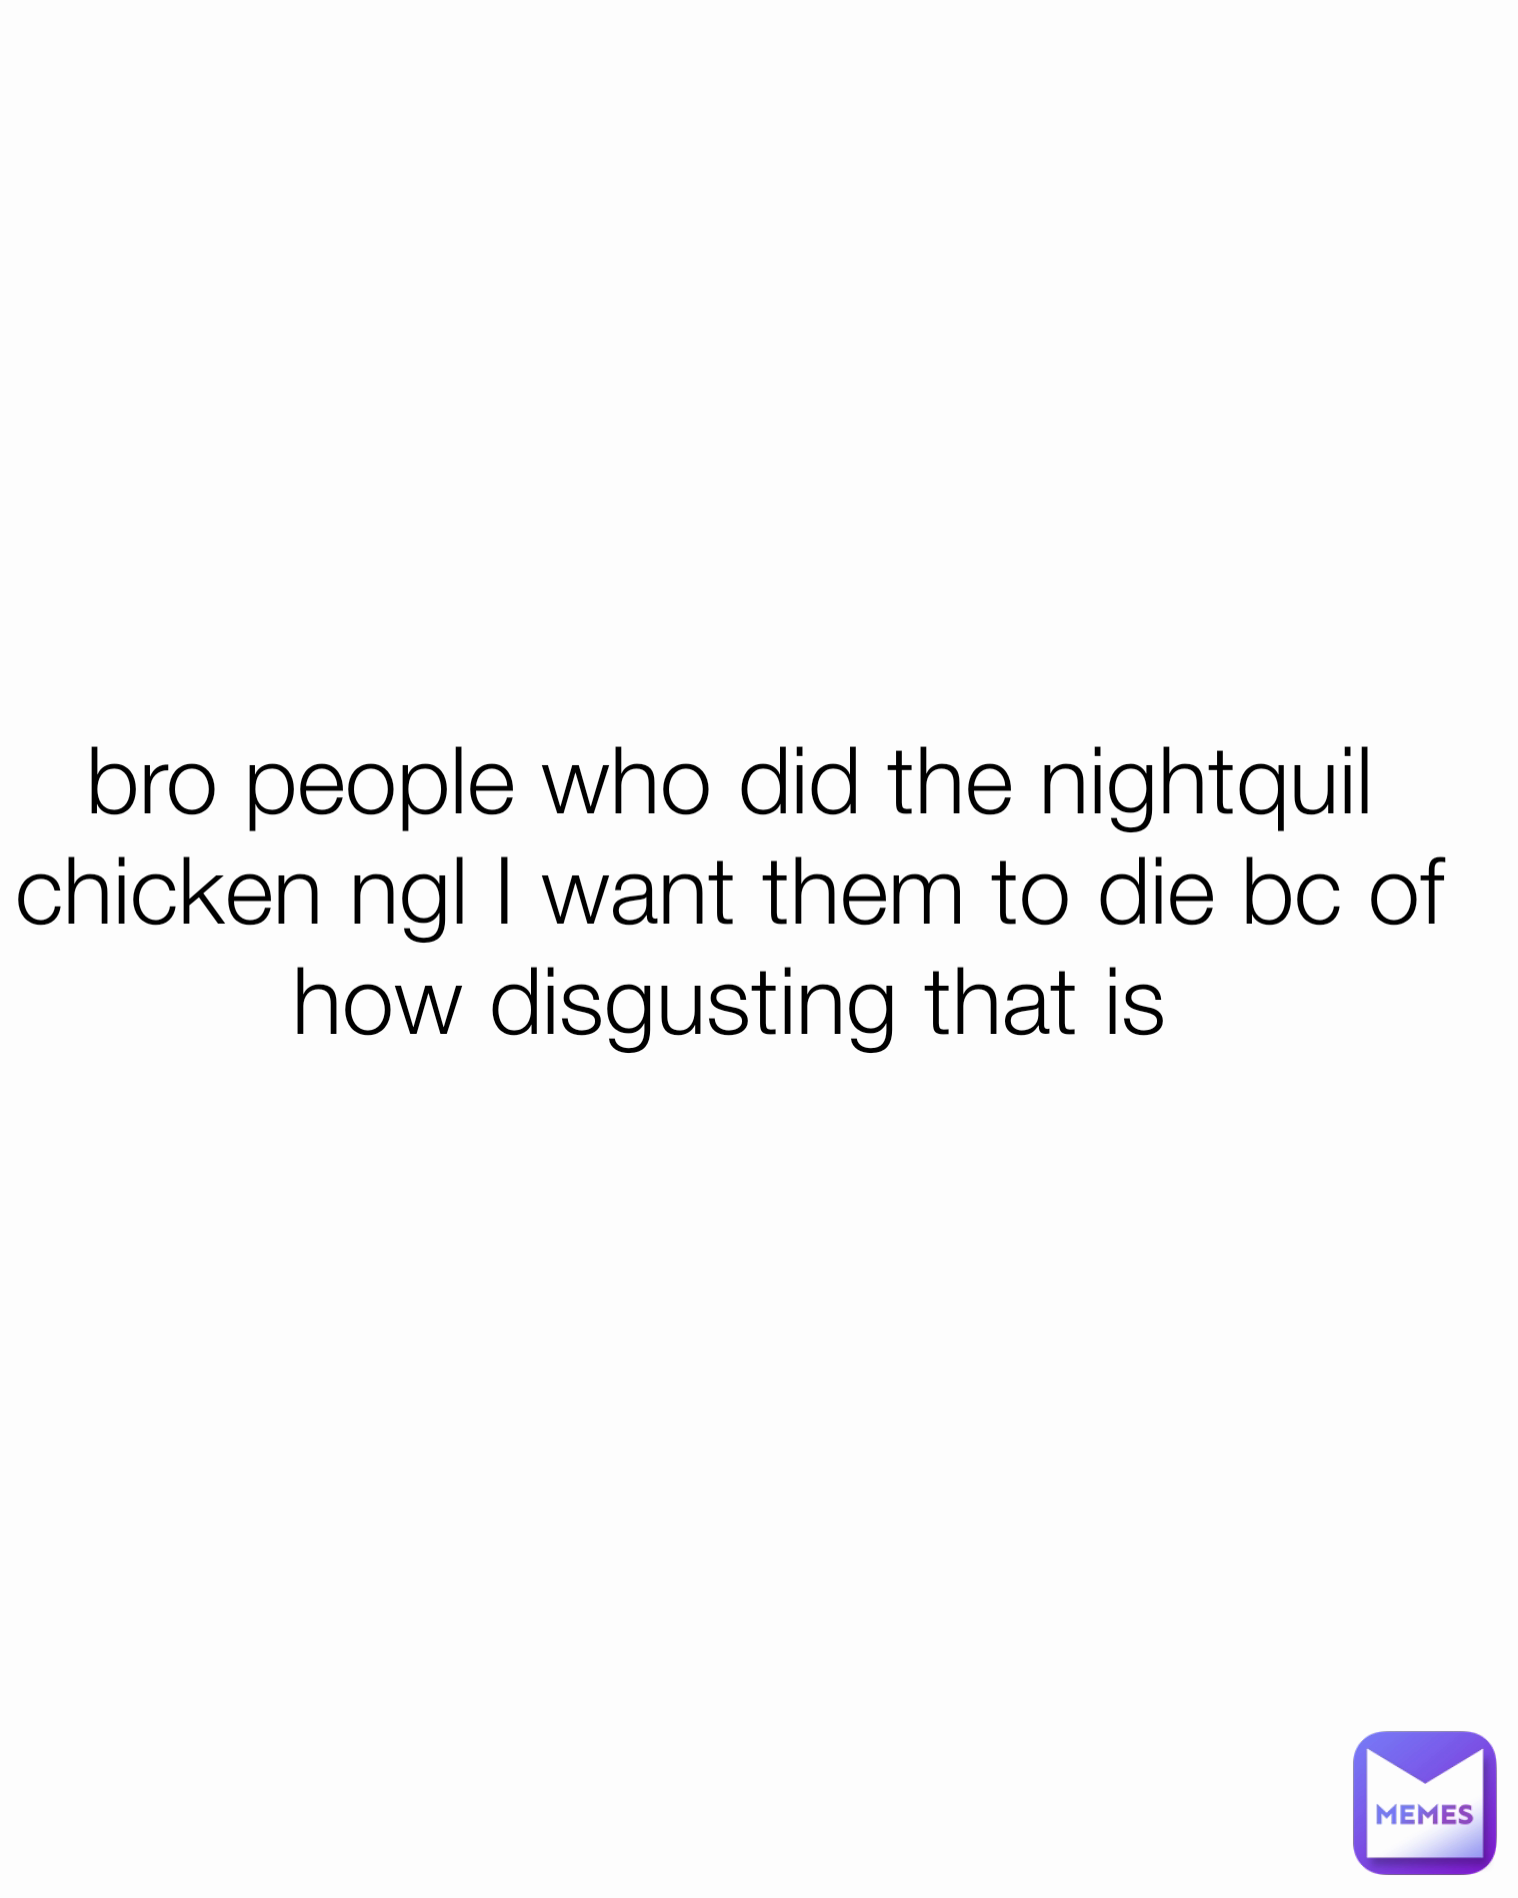 bro people who did the nightquil chicken ngl I want them to die bc of how disgusting that is